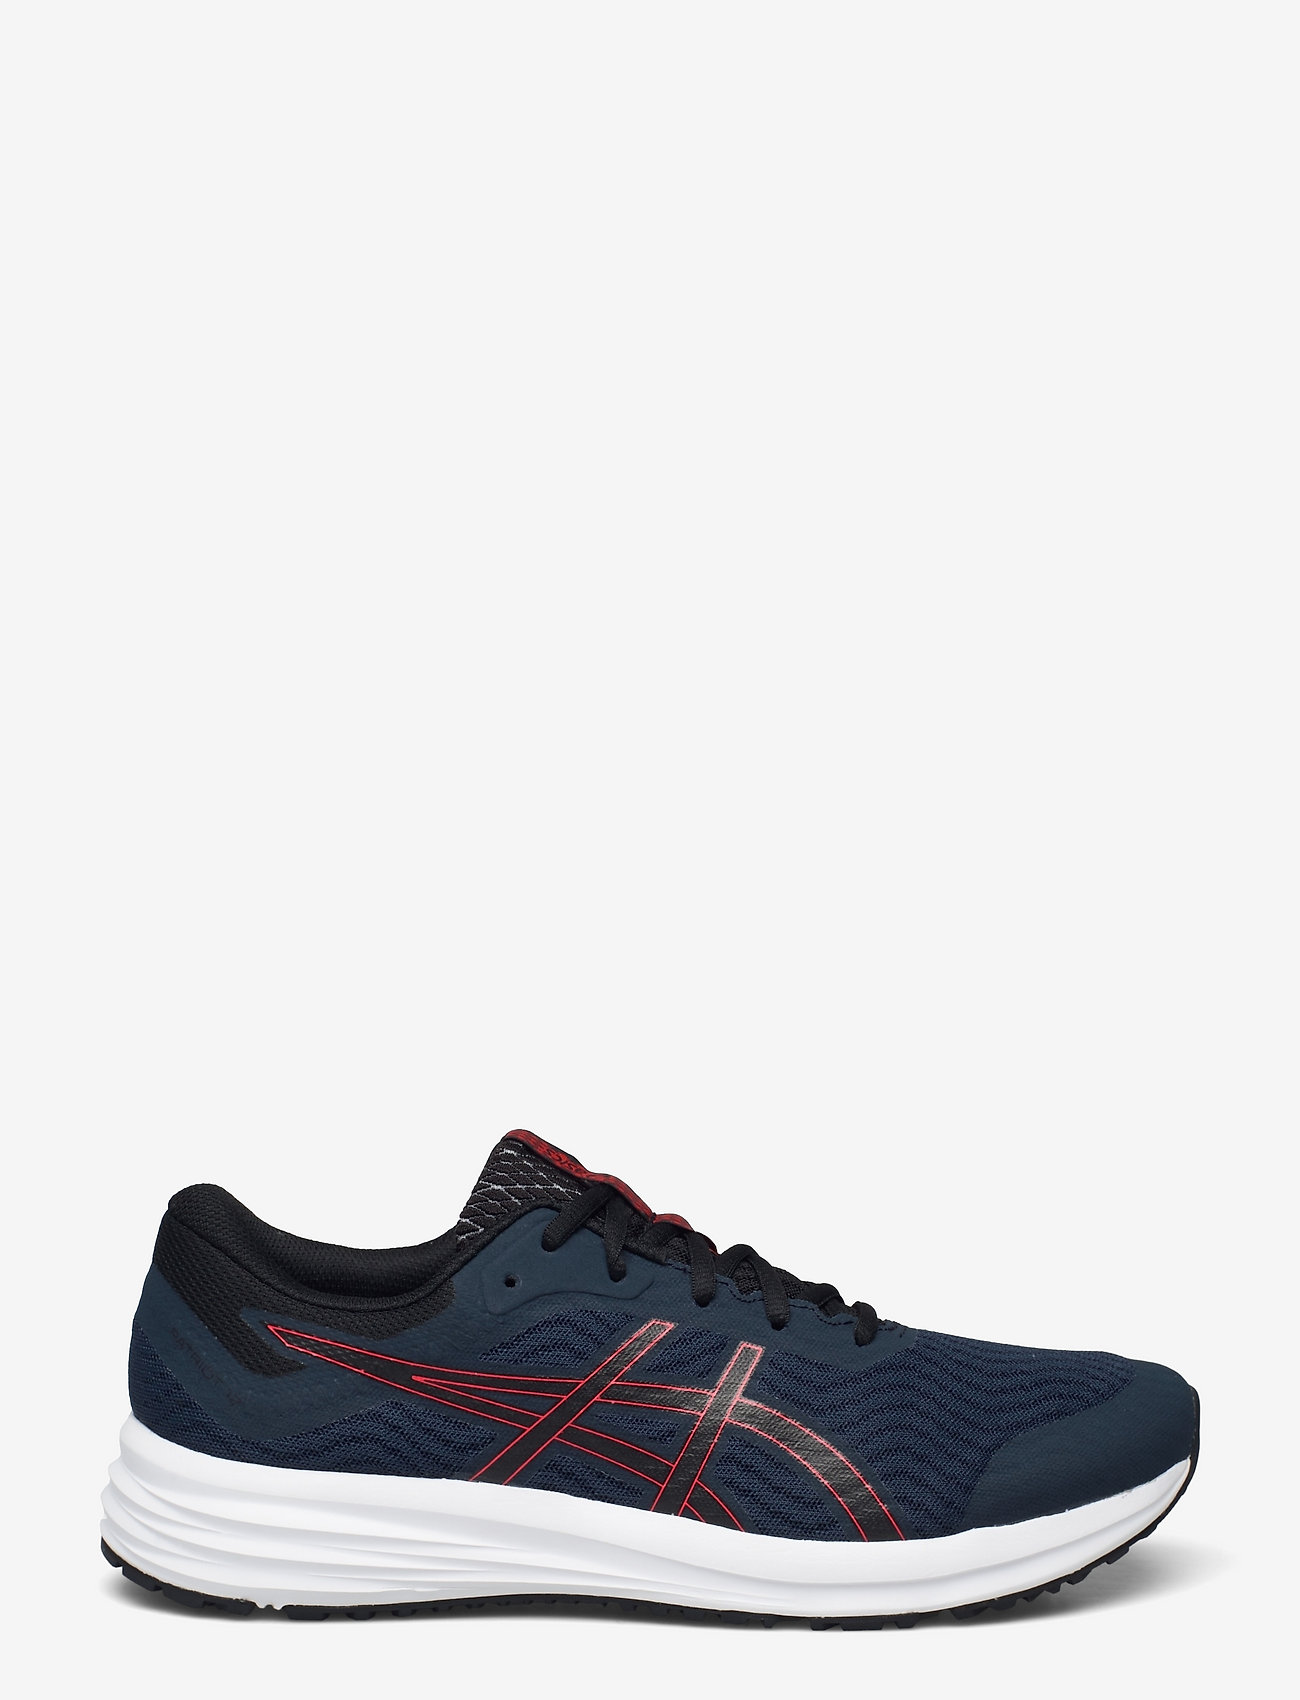 Asics - PATRIOT 12 - running shoes - french blue/black - 1